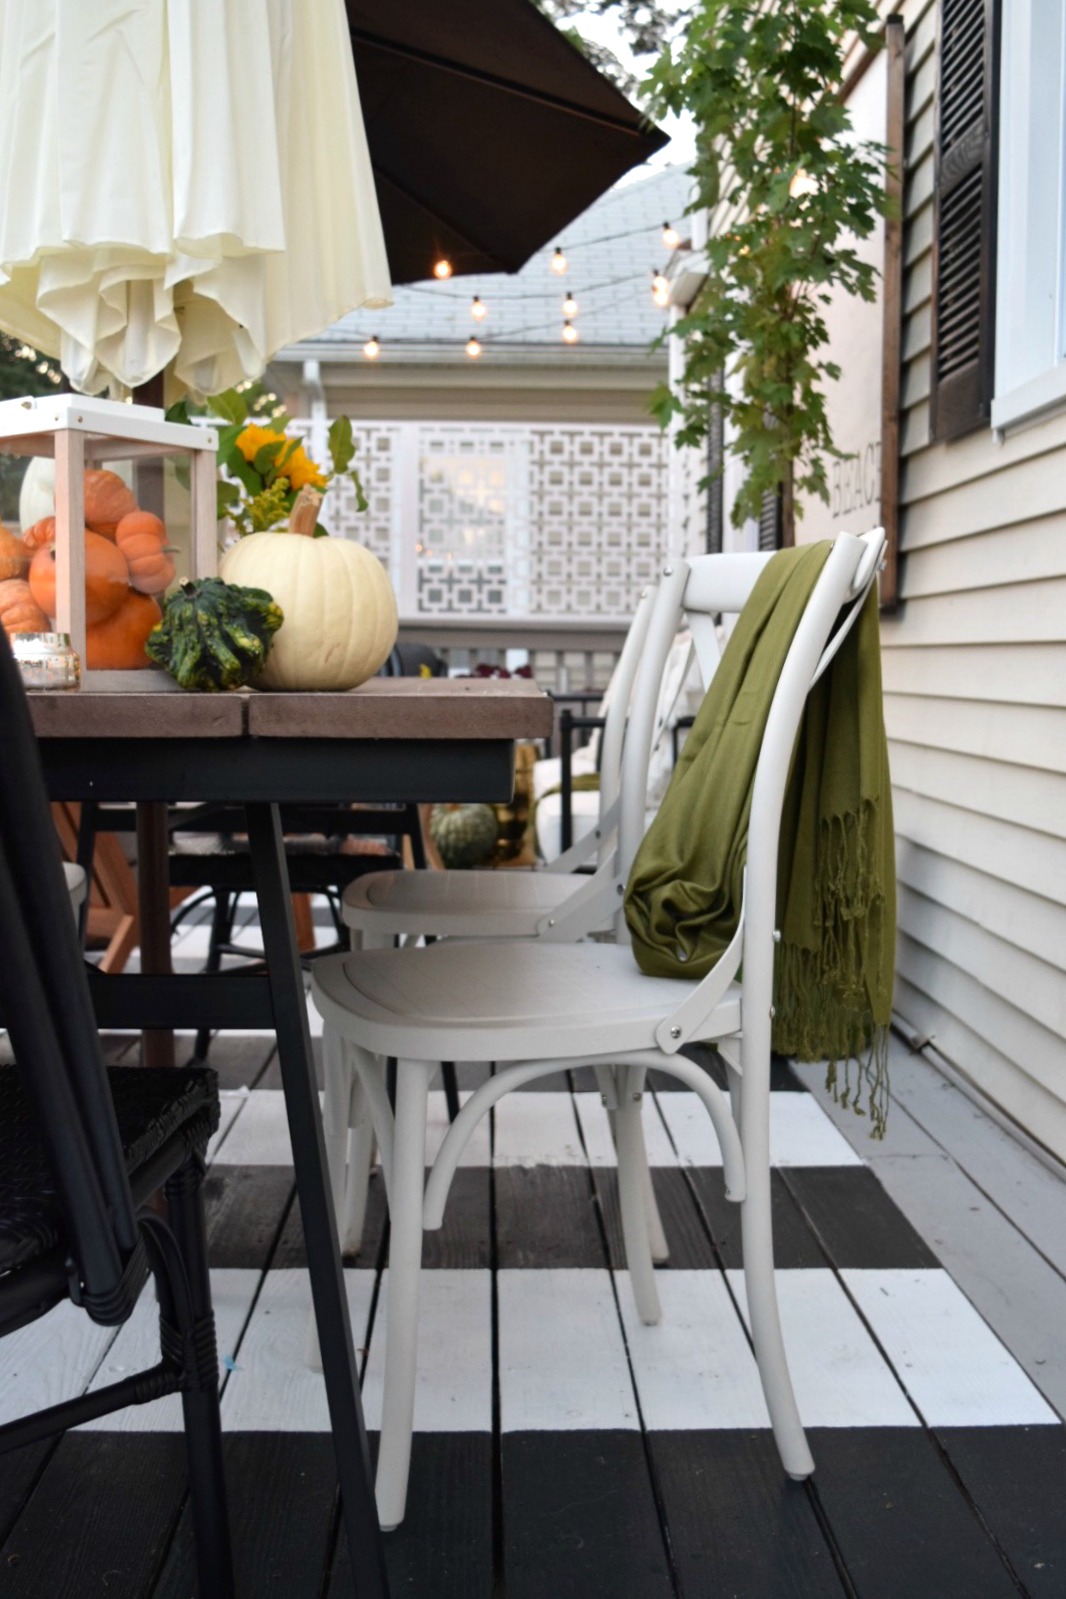 Simple Fall Table Setting Idea for Outdoor Entertaining